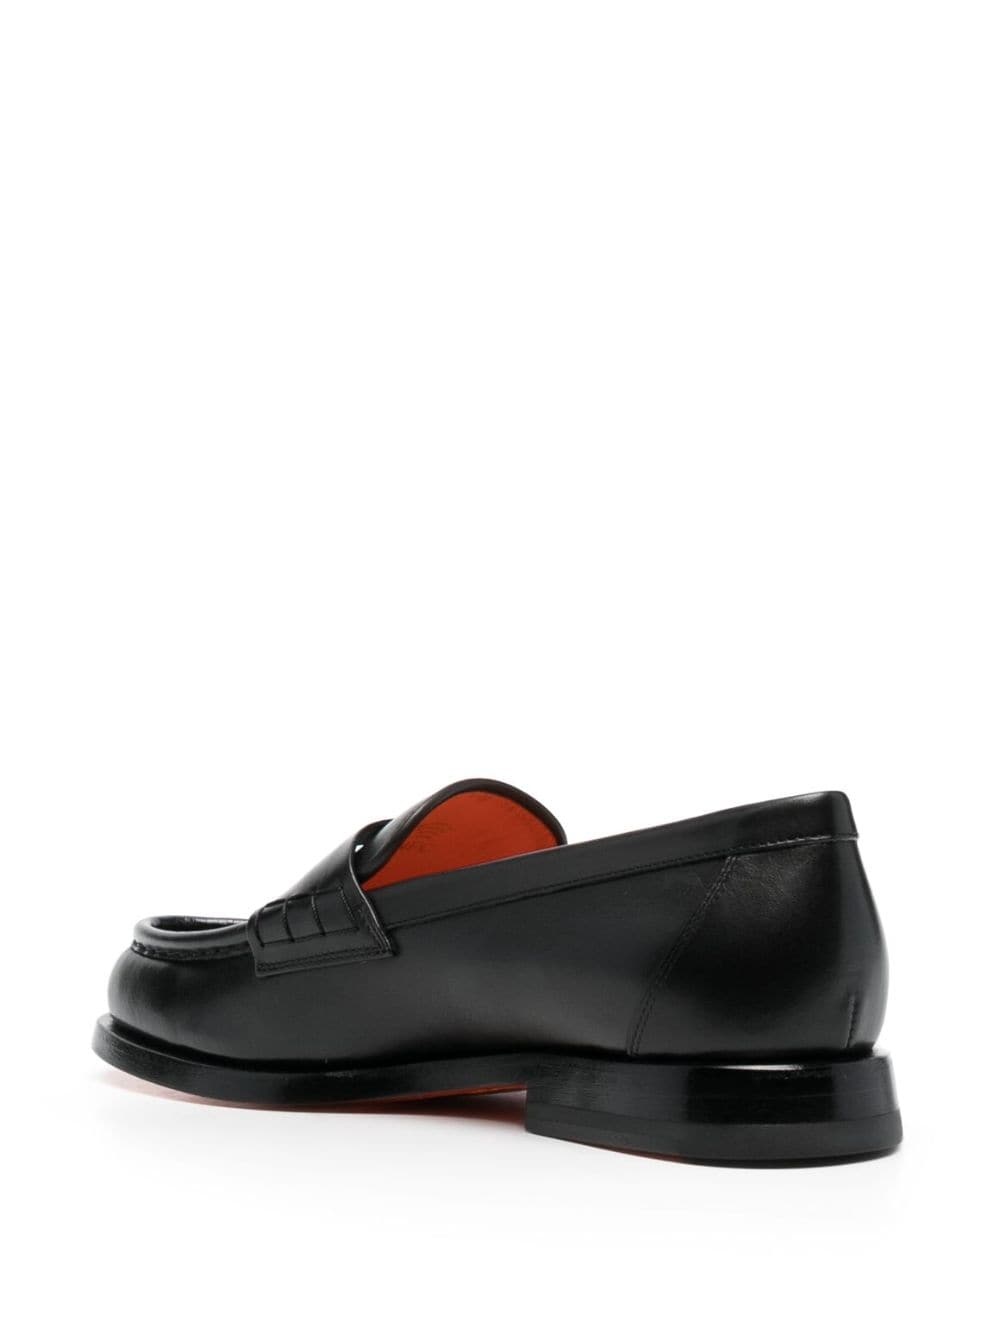 flat leather loafers - 3